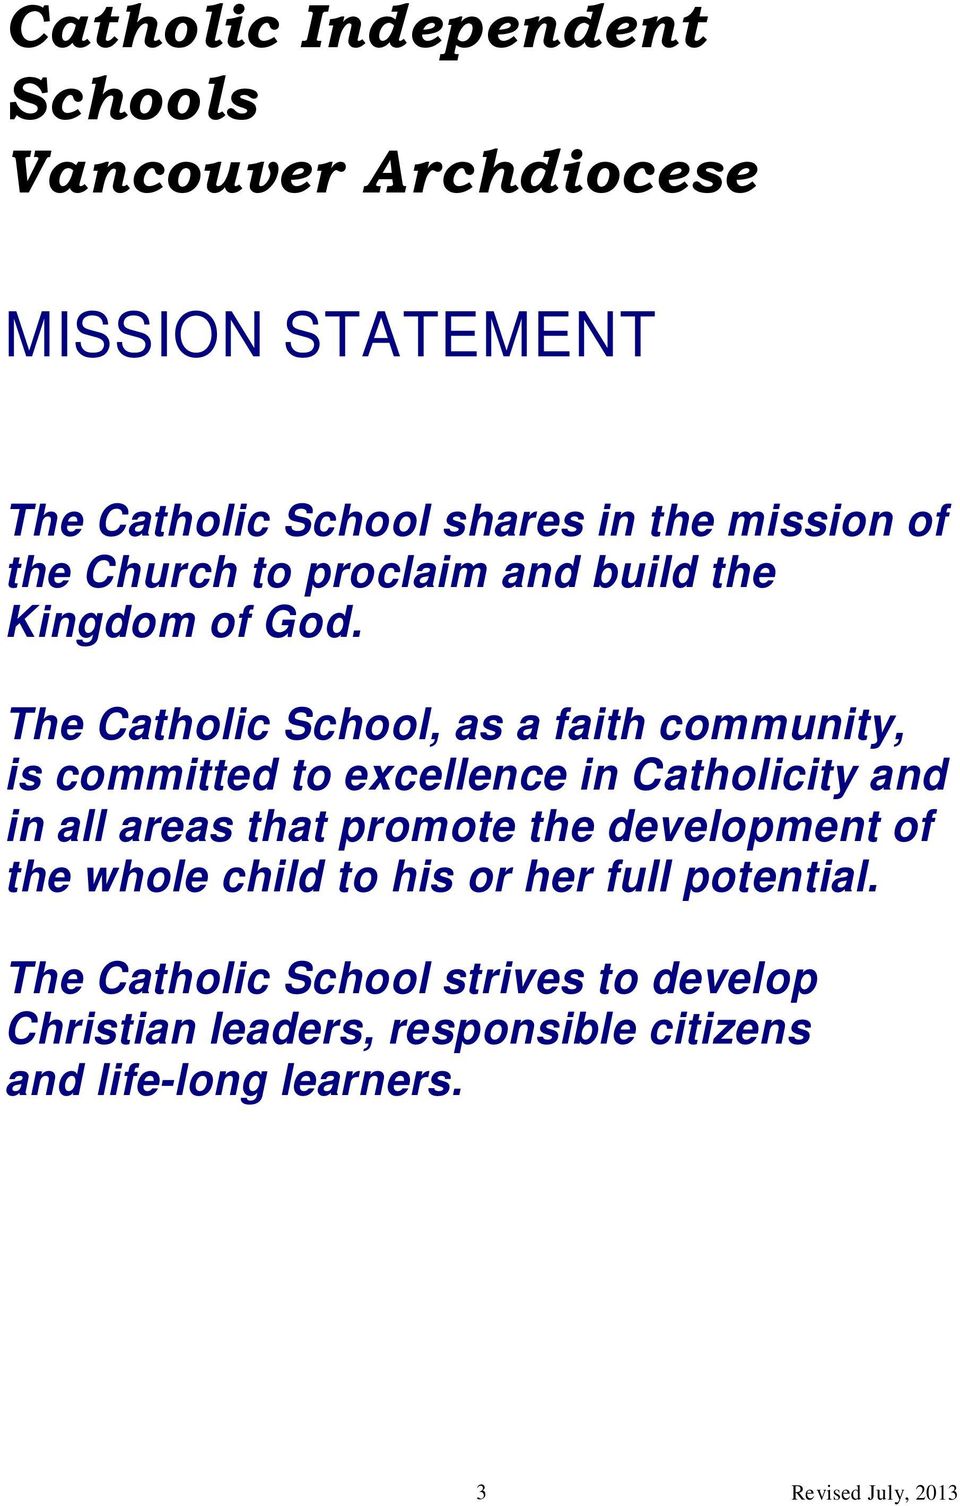 The Catholic School, as a faith community, is committed to excellence in Catholicity and in all areas that